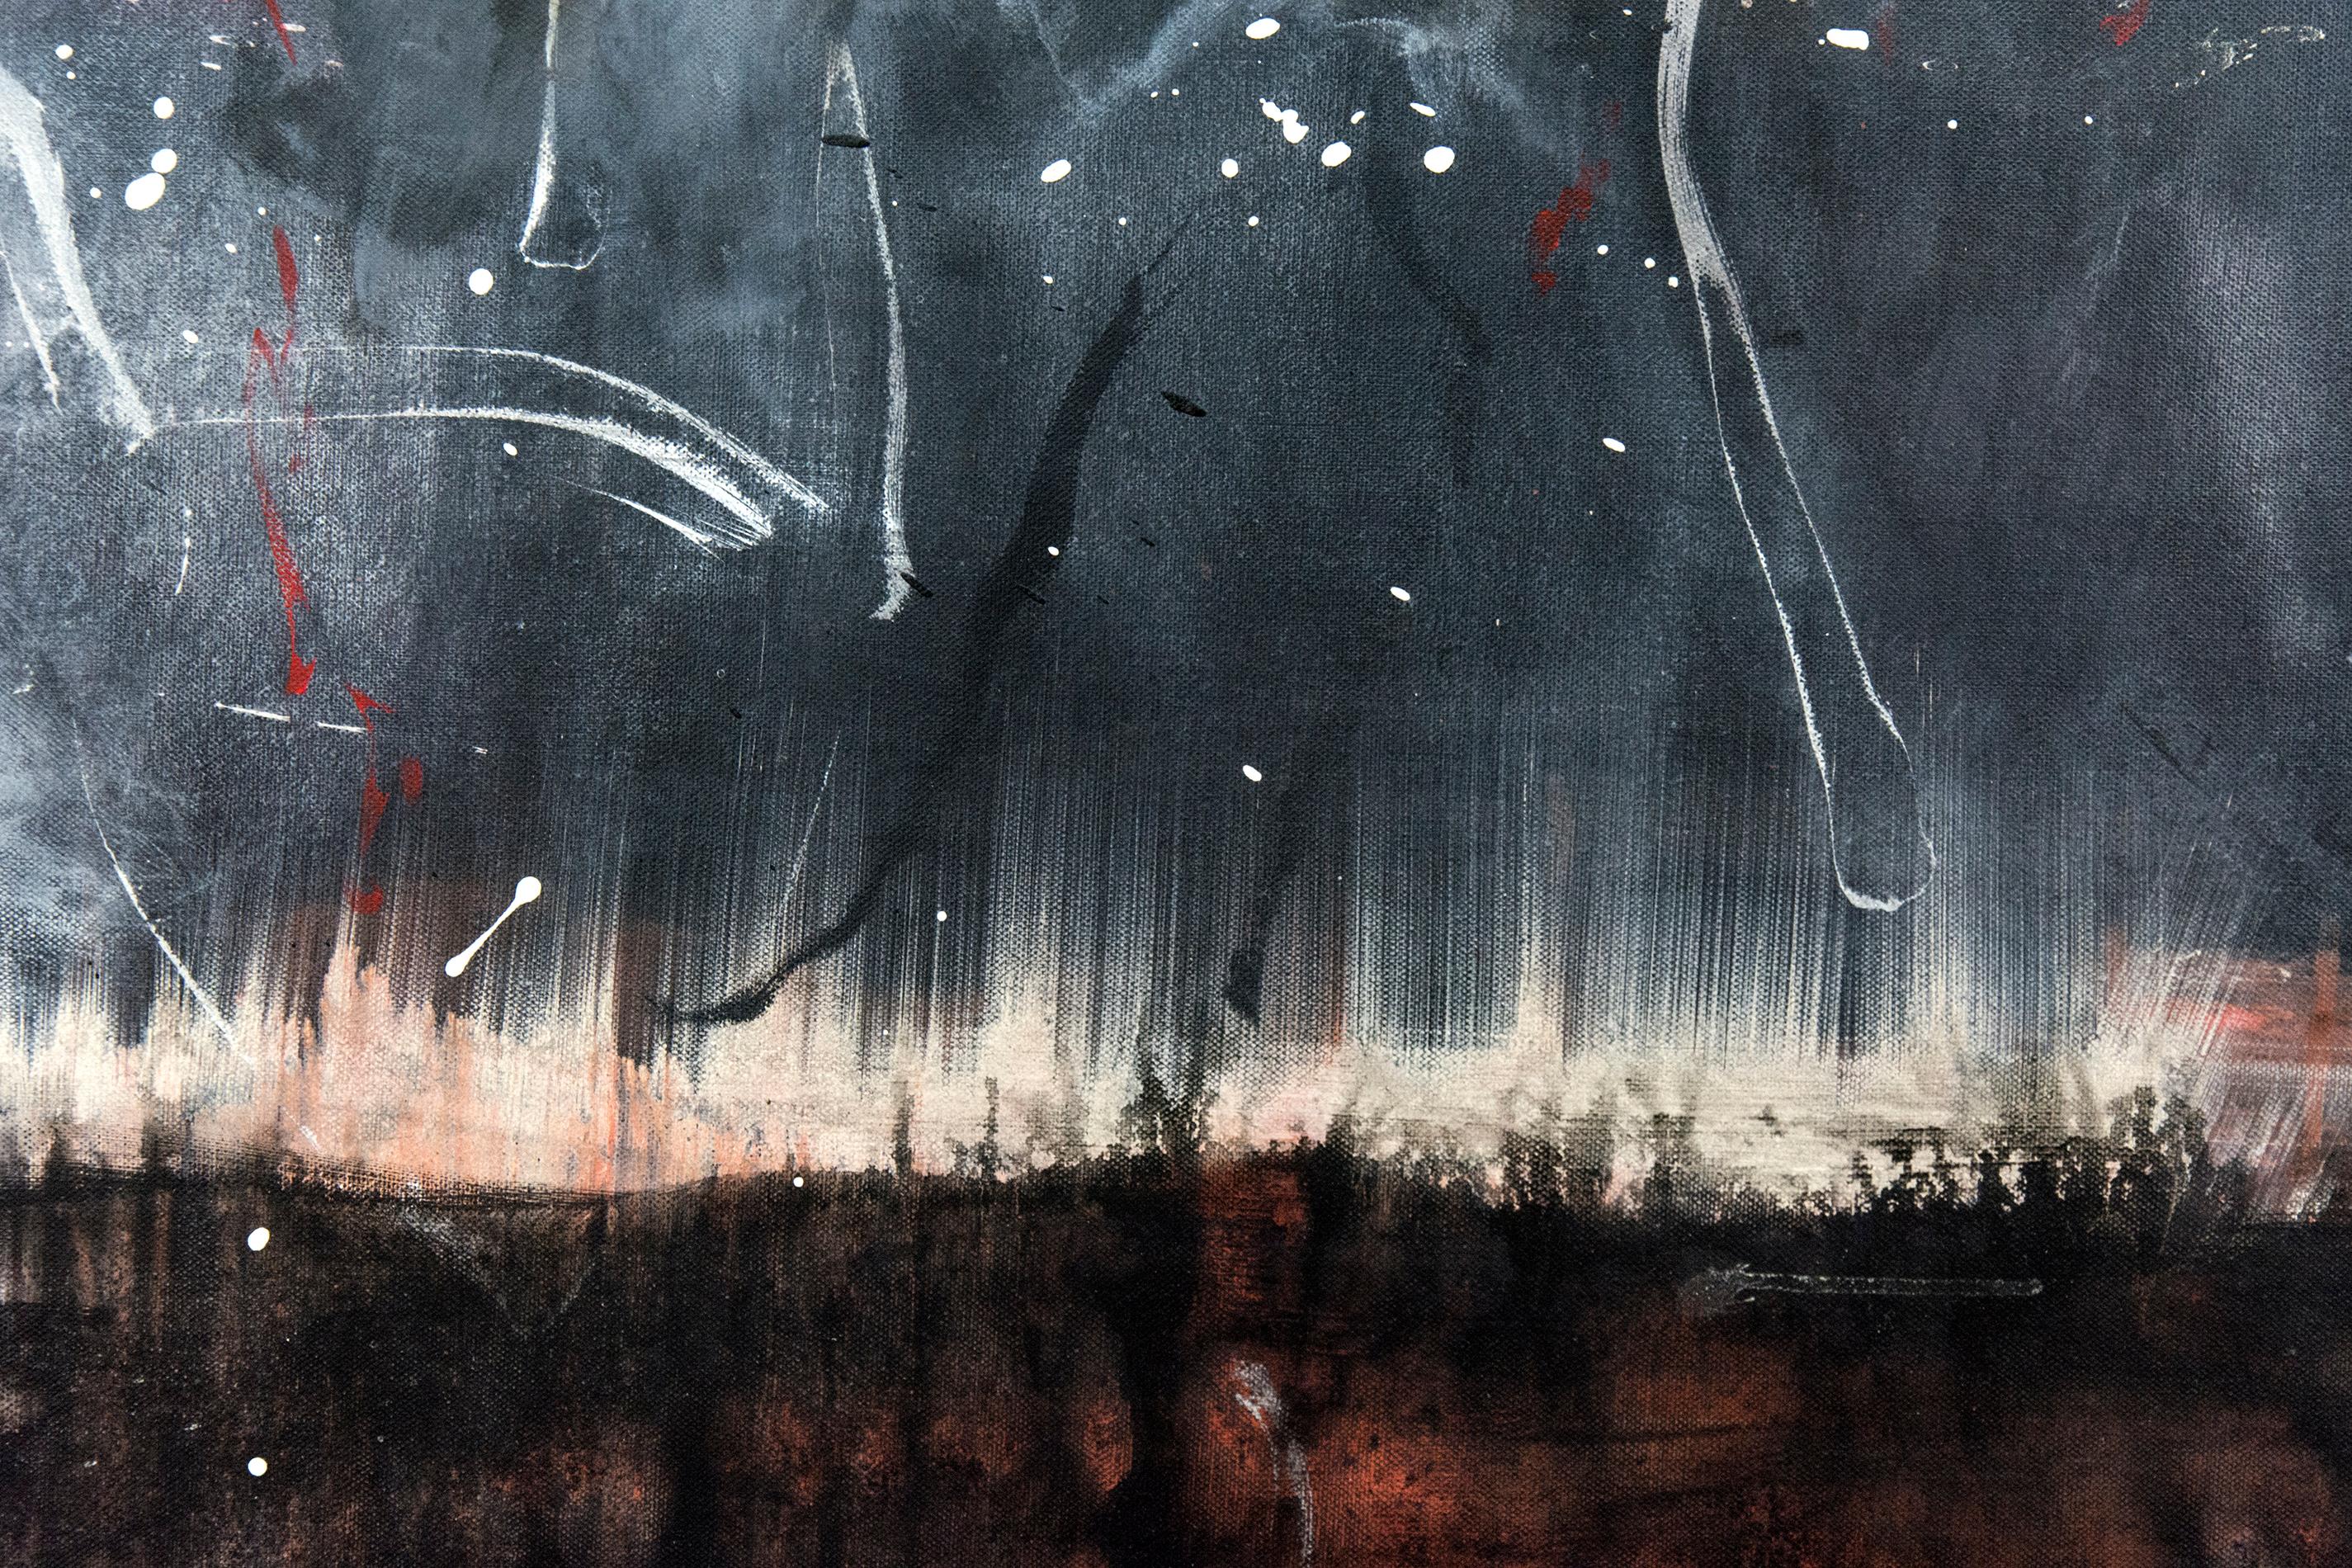 Storm - large, dark, smoky, atmospheric abstracted landscape, acrylic on canvas - Painting by Lynne Fernie